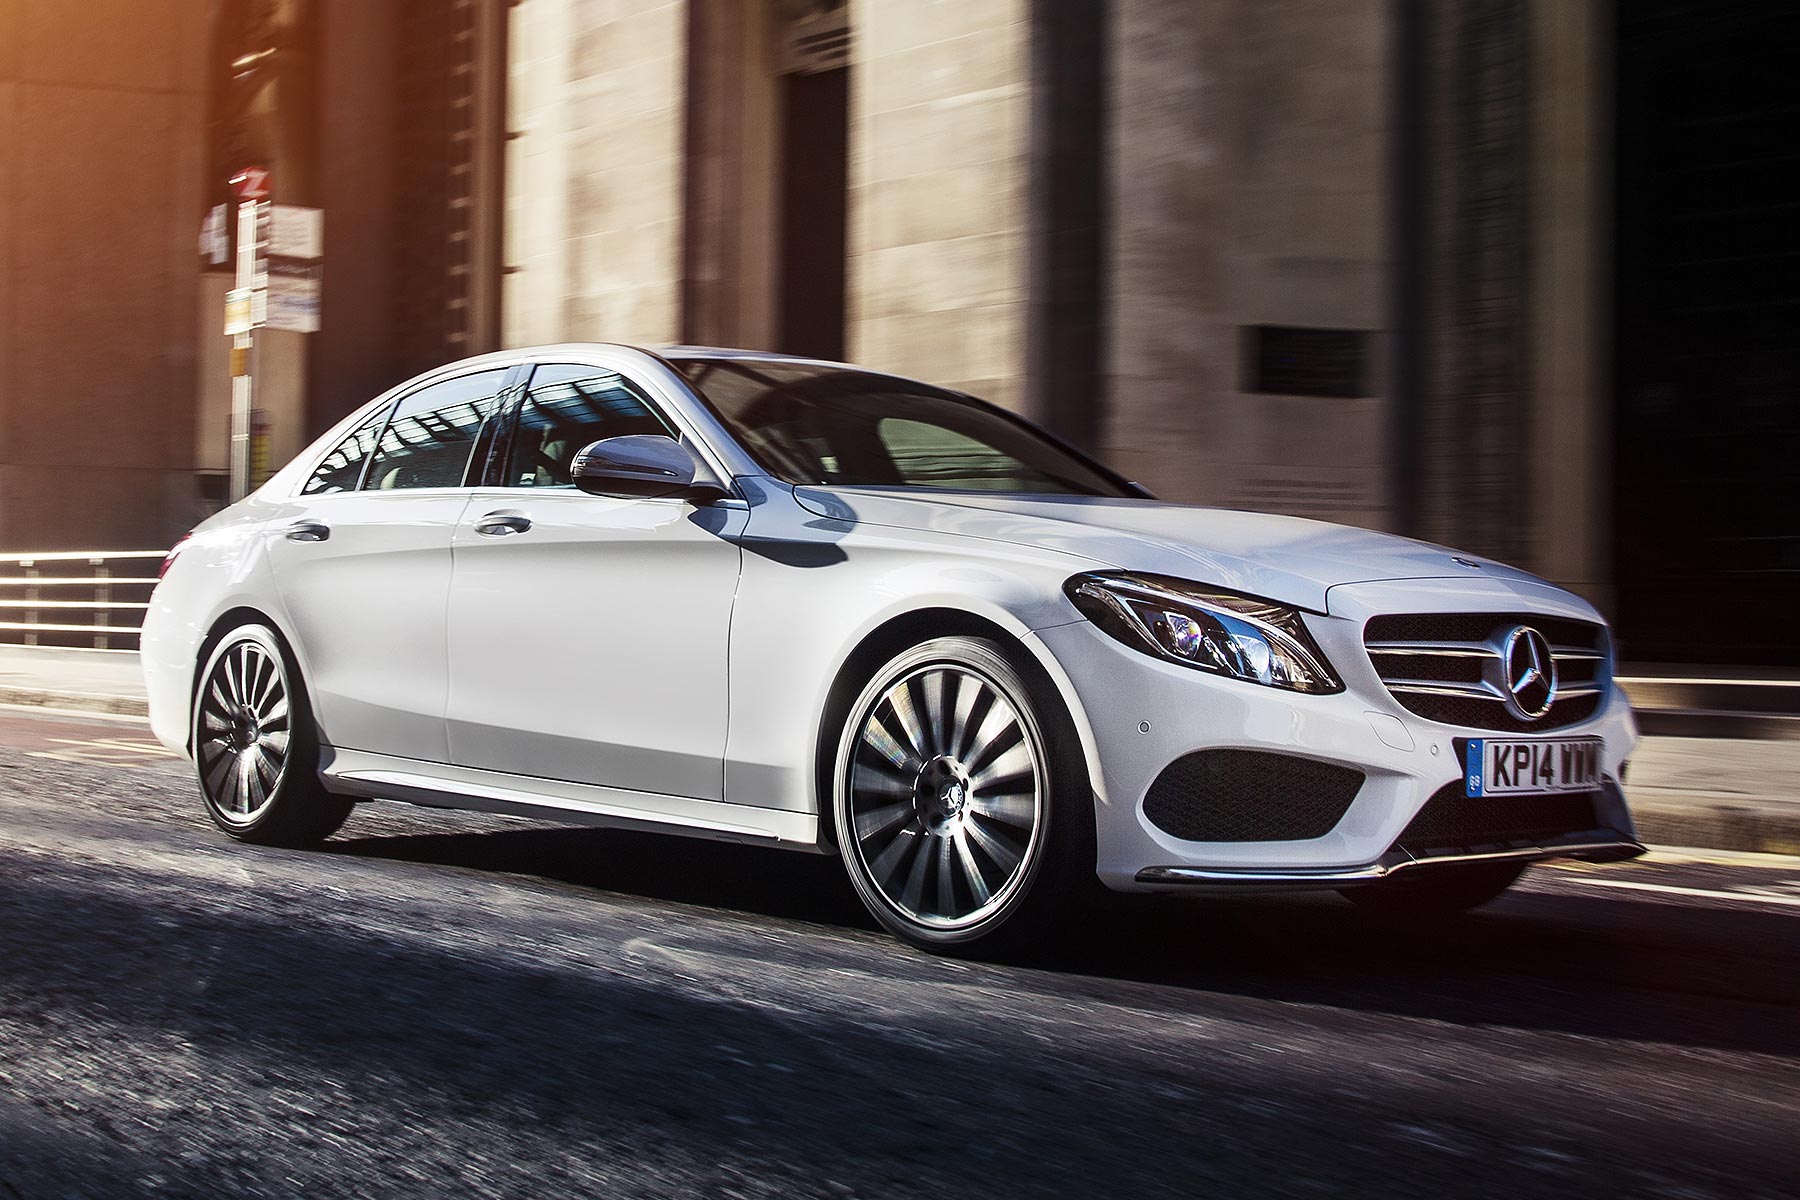 Mercedes-Benz C 250 d AMG Line review: 2015 road test | Motoring Research